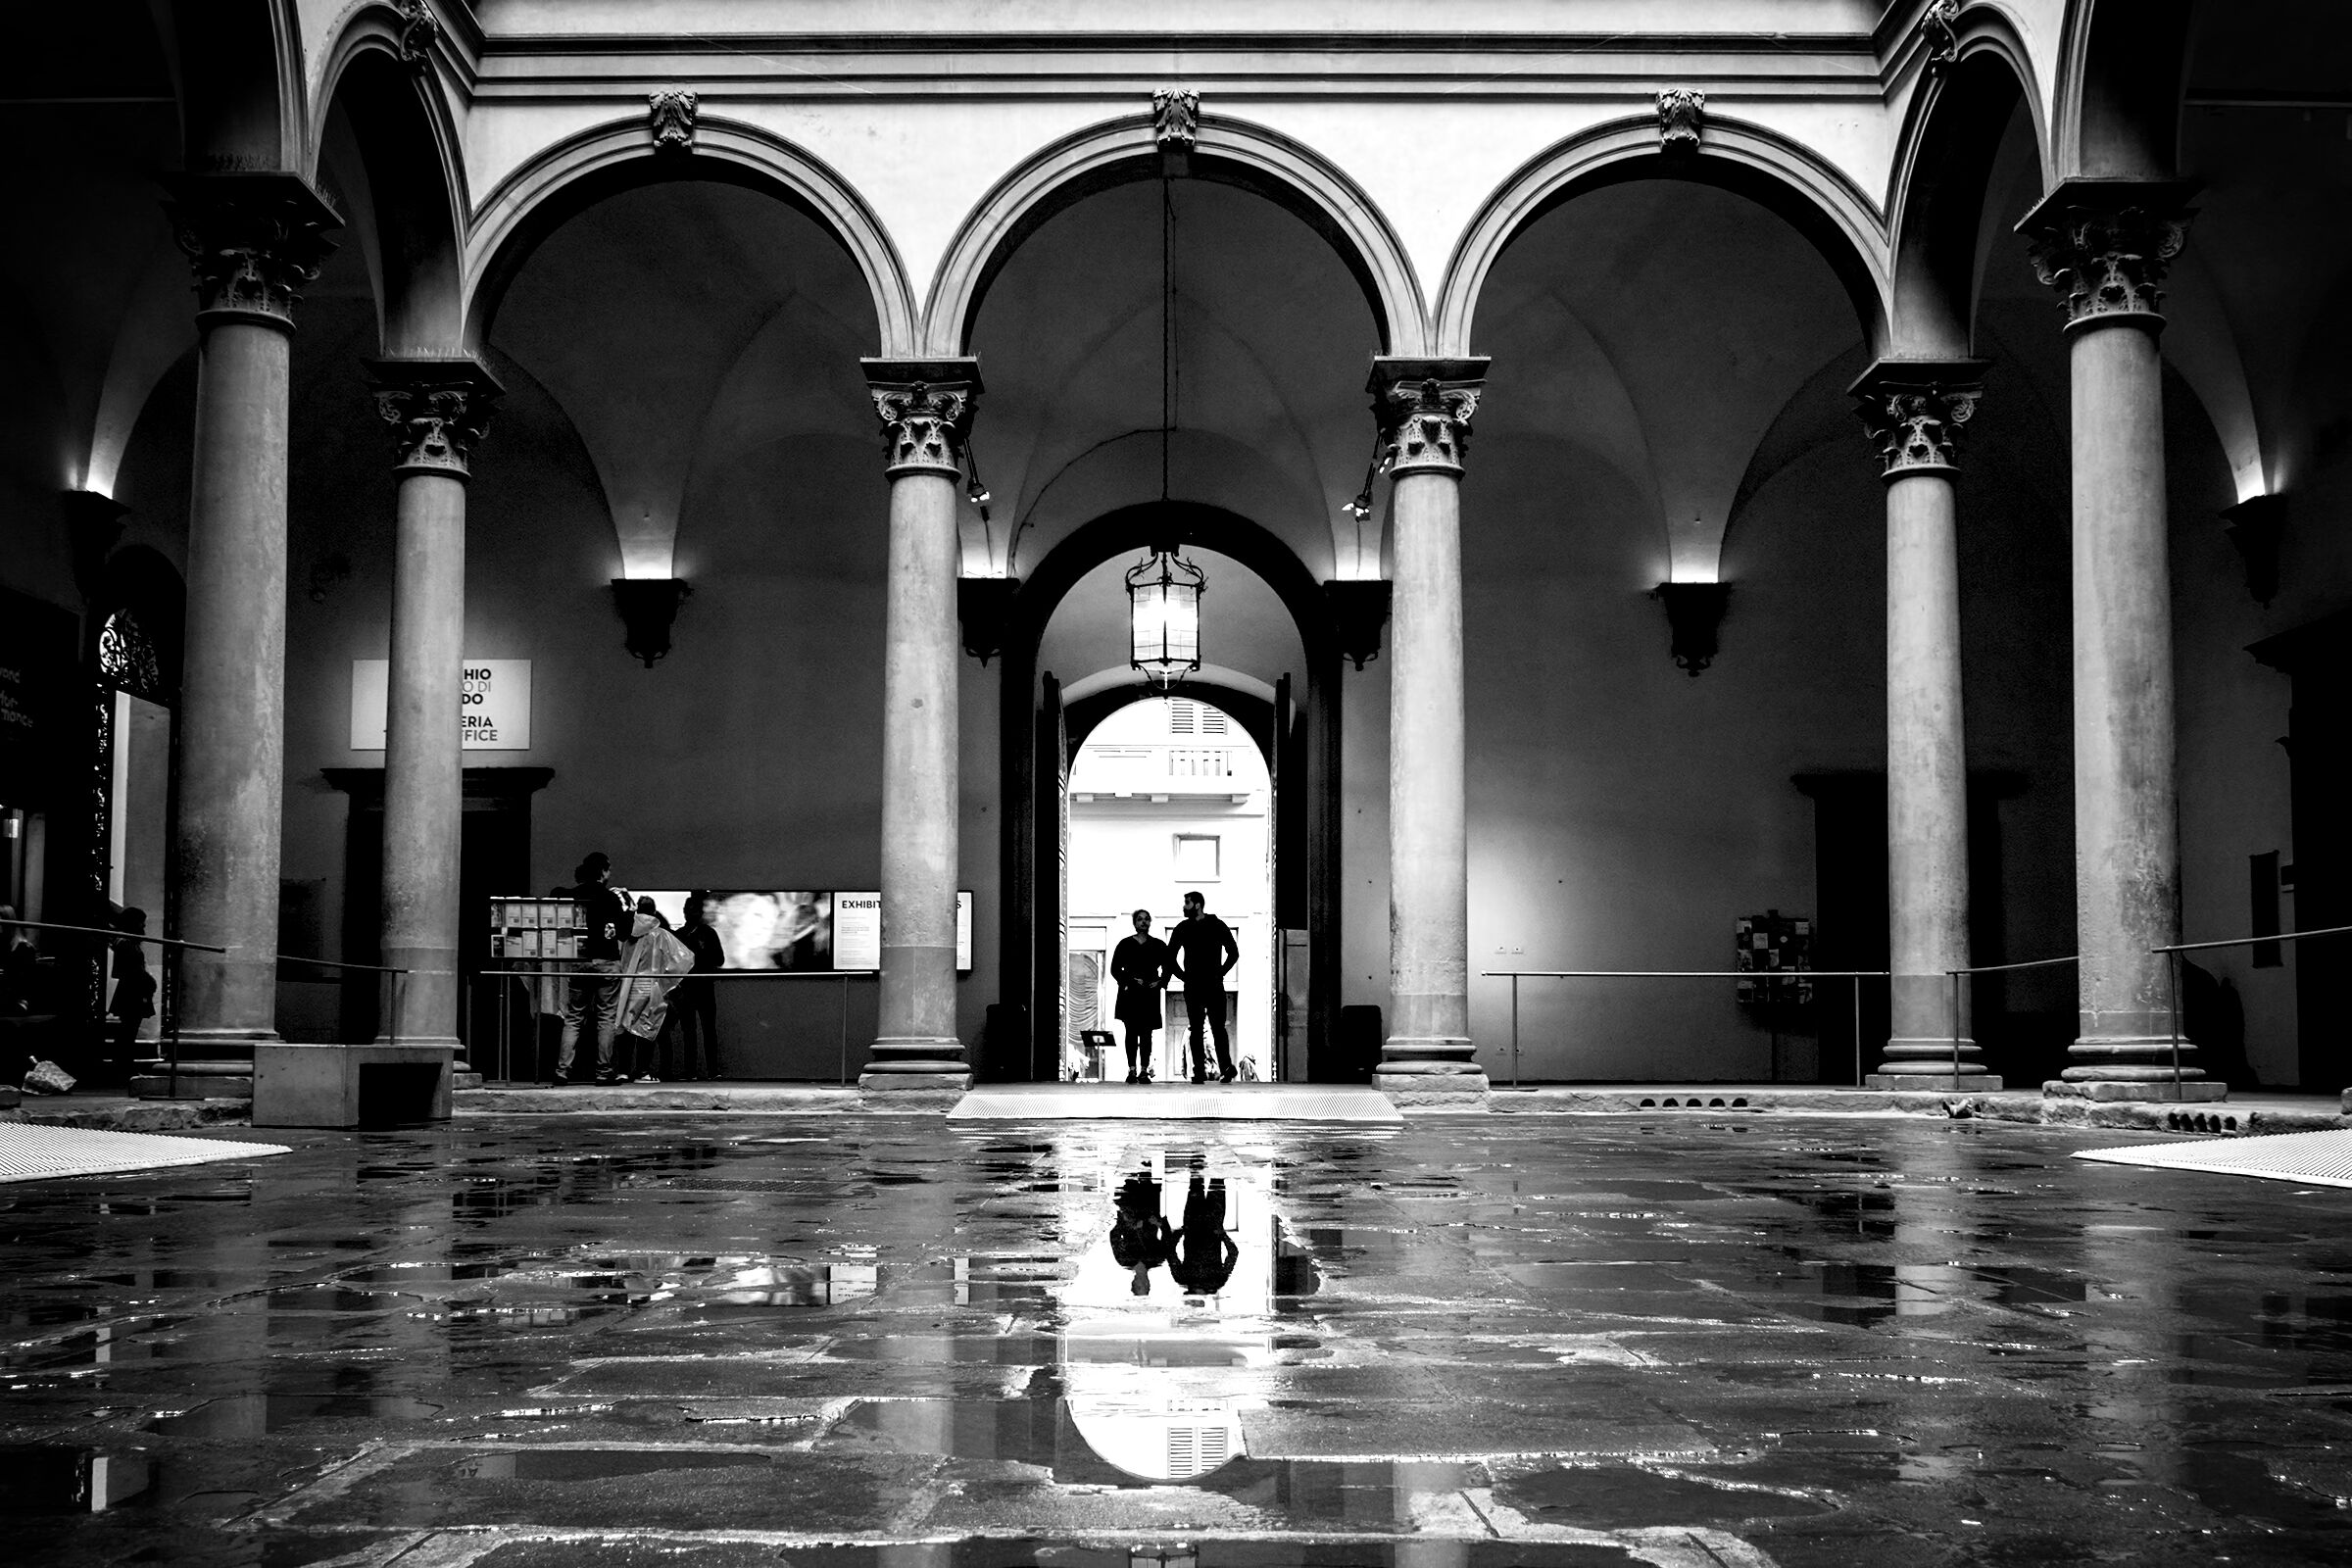 Palazzo Strozzi, after the downpour...